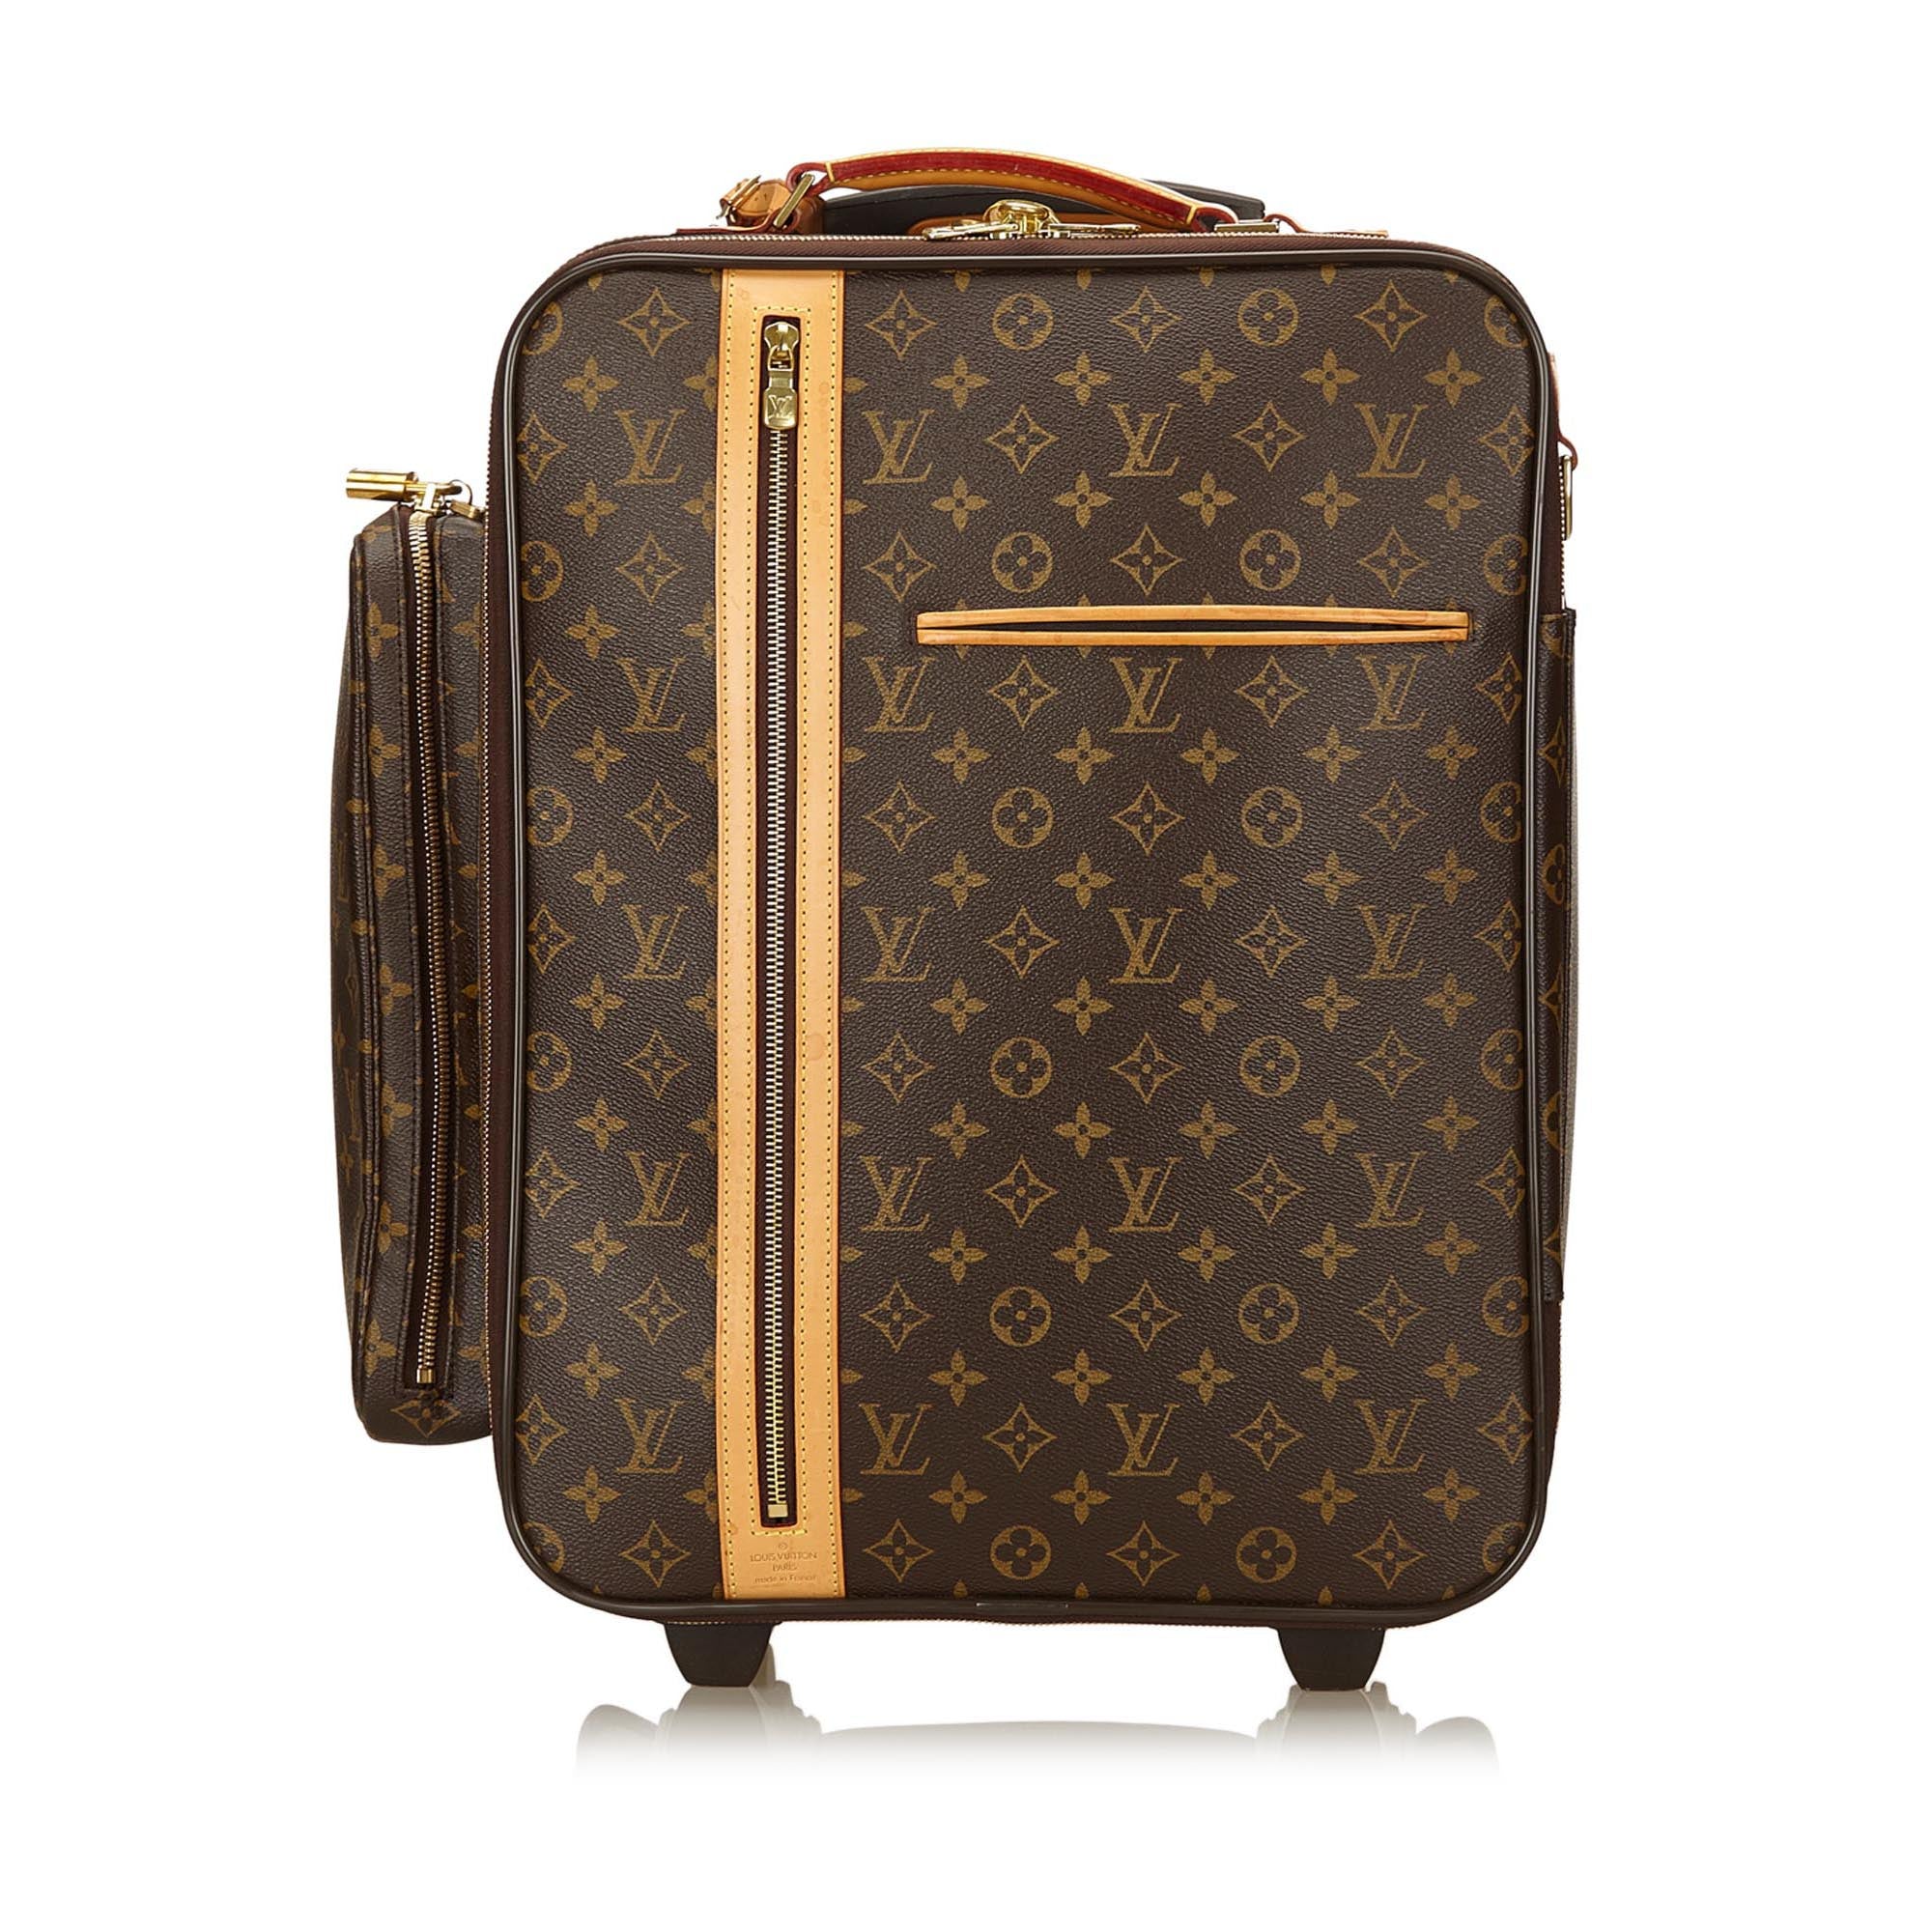 Shop Louis Vuitton Luggage & Travel Bags (M10143, M10149) by